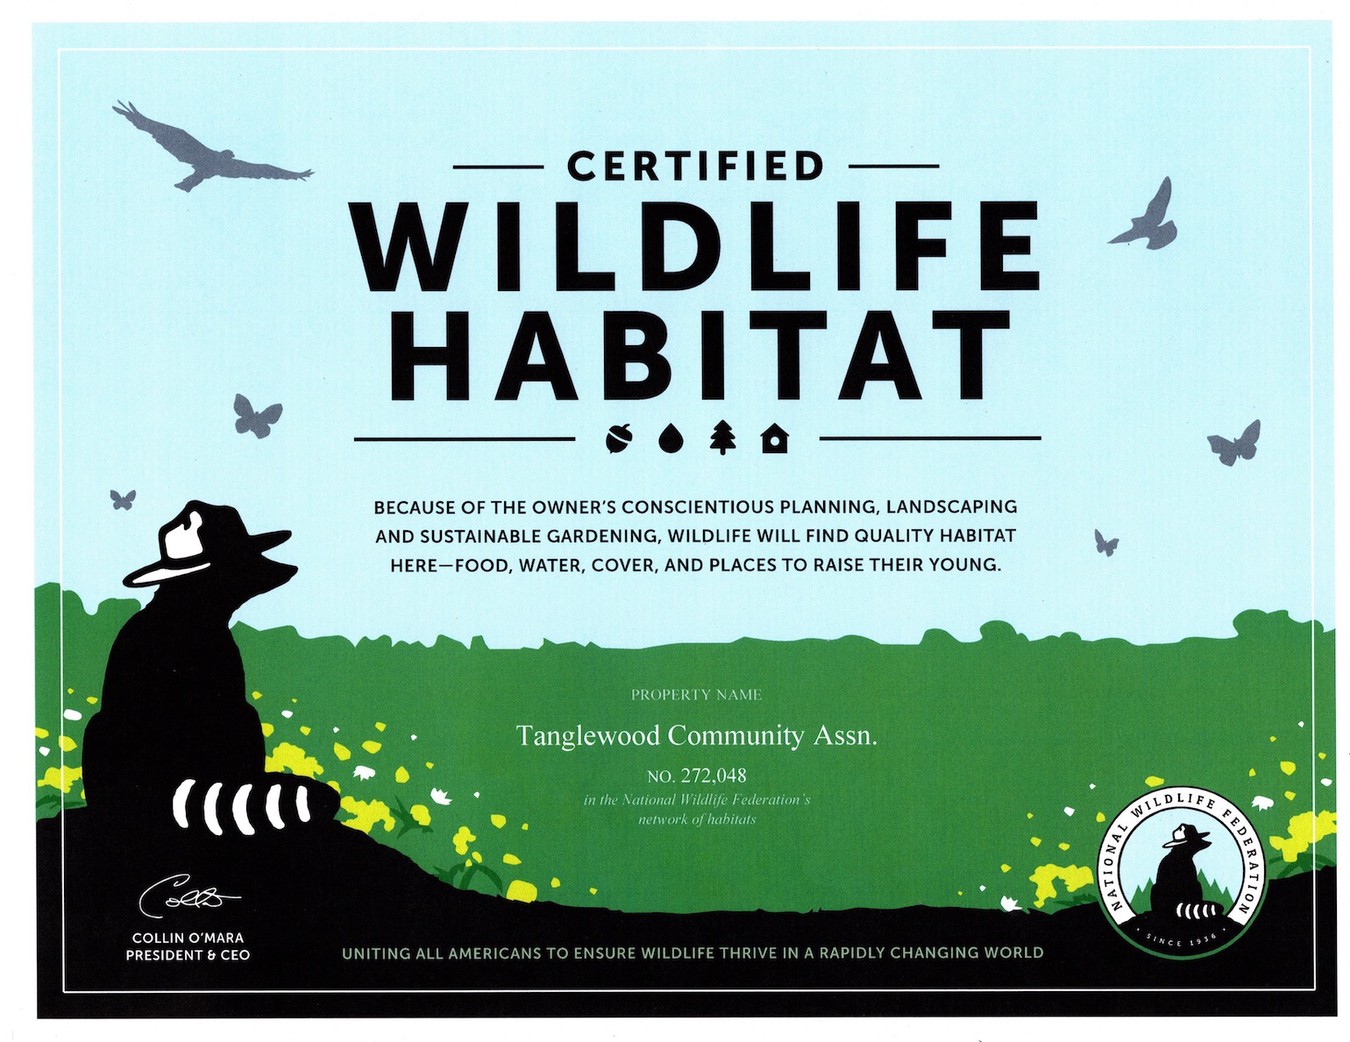 National Wildlife Federation certificate